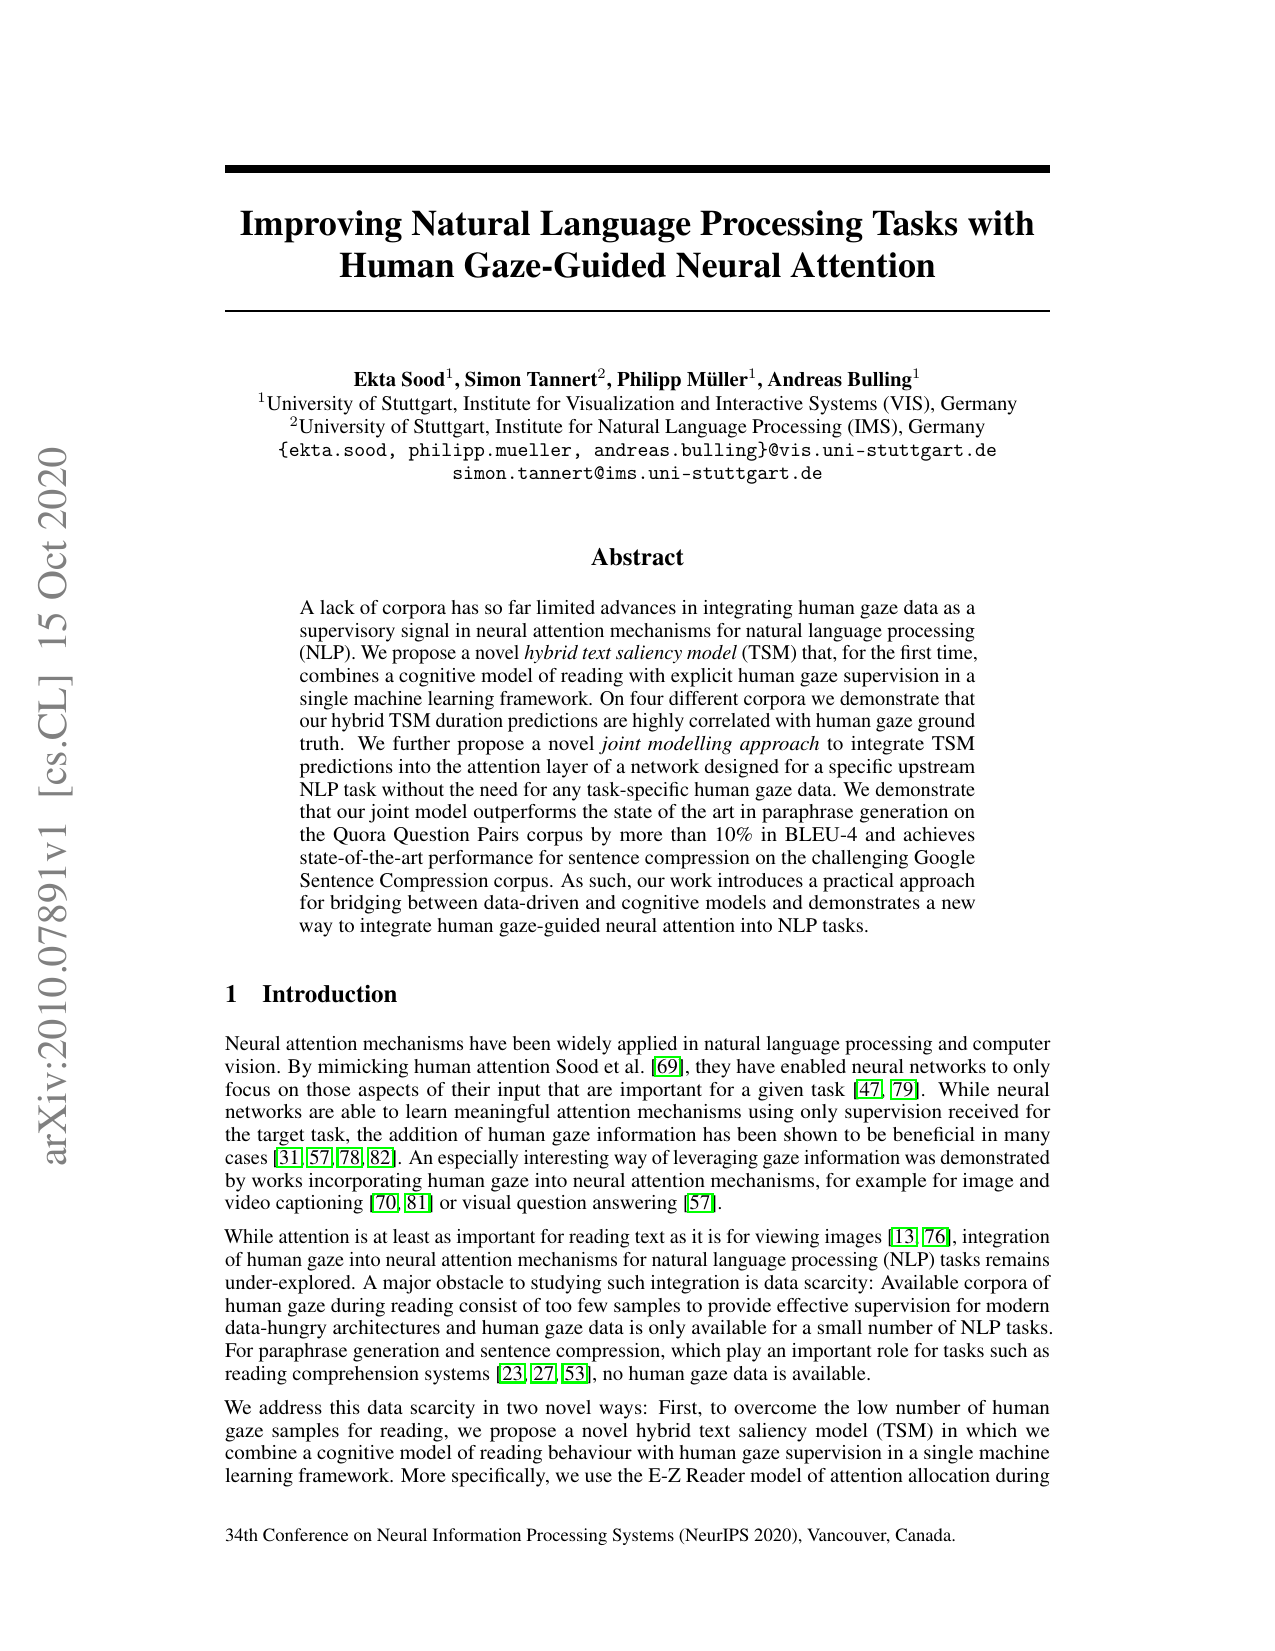 Improving Natural Language Processing Tasks with Human Gaze-Guided Neural Attention